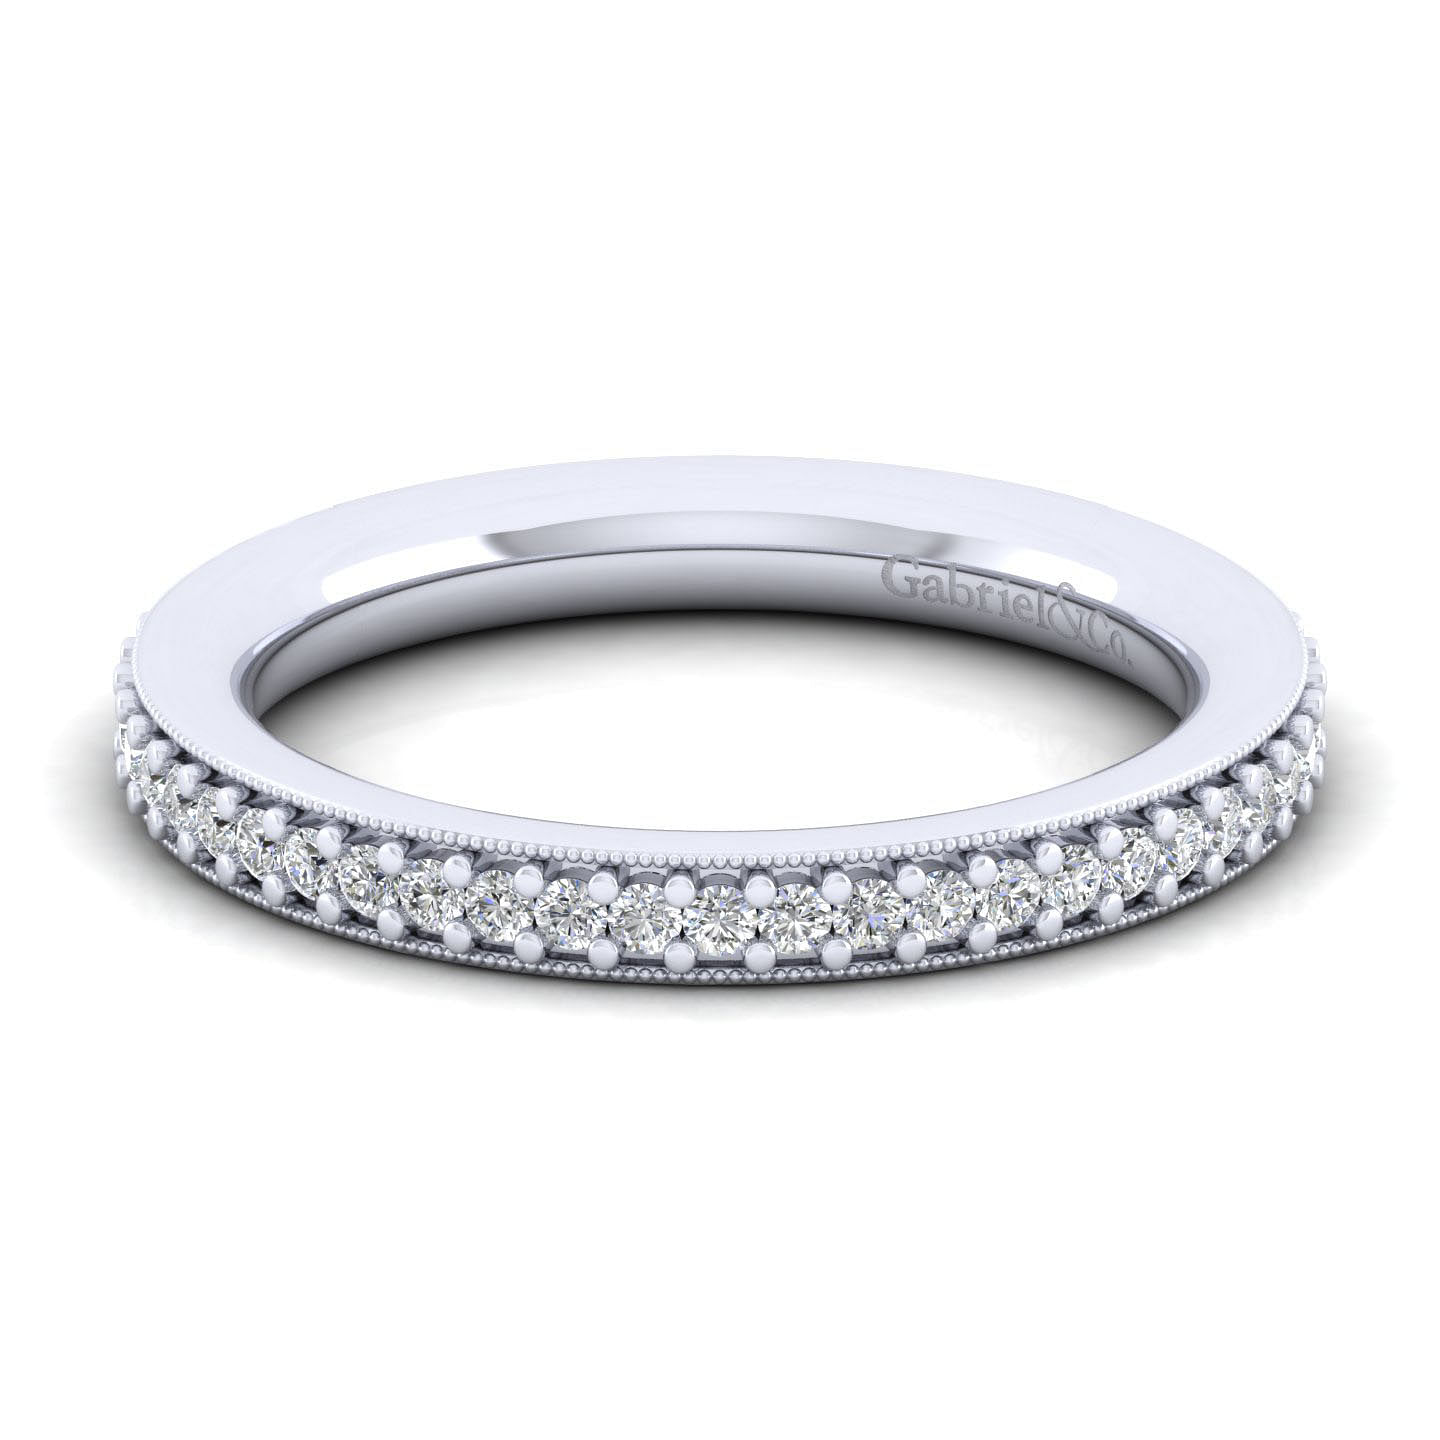 Lumierre - 14K White Gold Channel Prong Diamond Anniversary Band with Millgrain